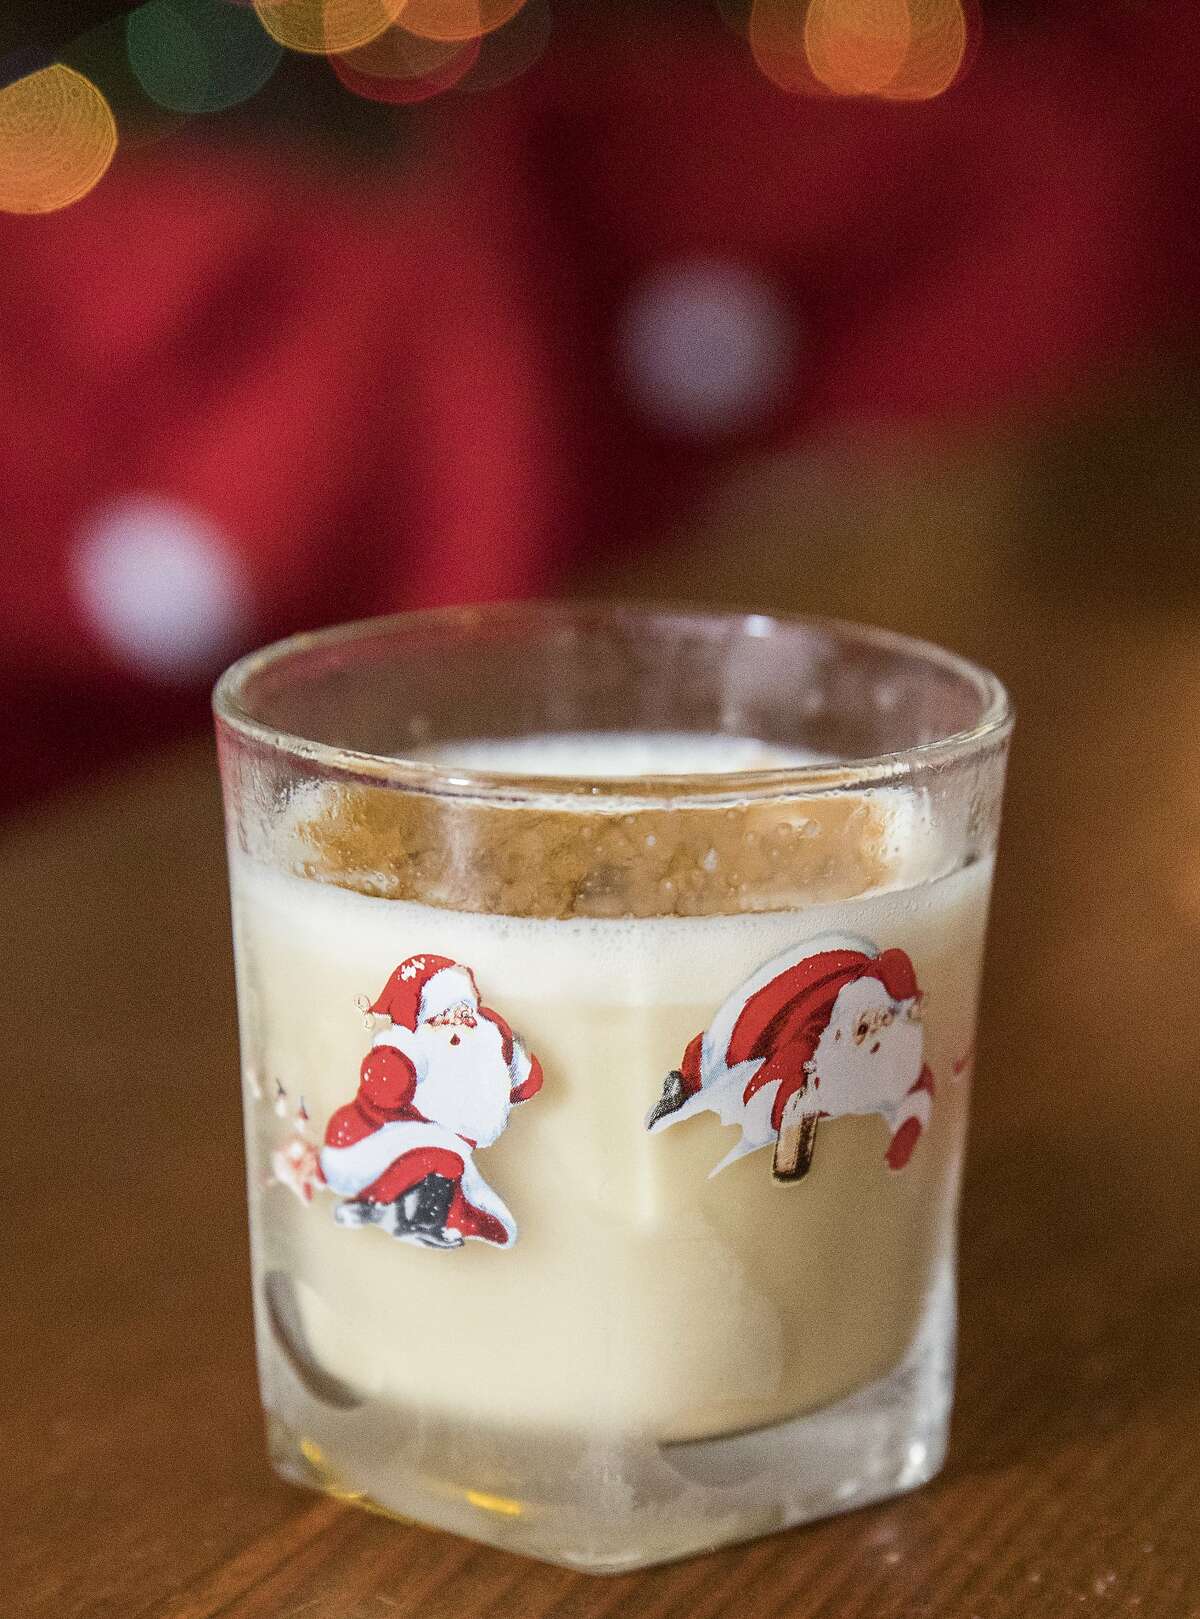 The Gingerbread Flip cocktail at Pacific Cocktail Haven's Christmas-themed pop-up called "Miracle" in San Francisco, Calif. Tuesday, Dec. 18, 2018.